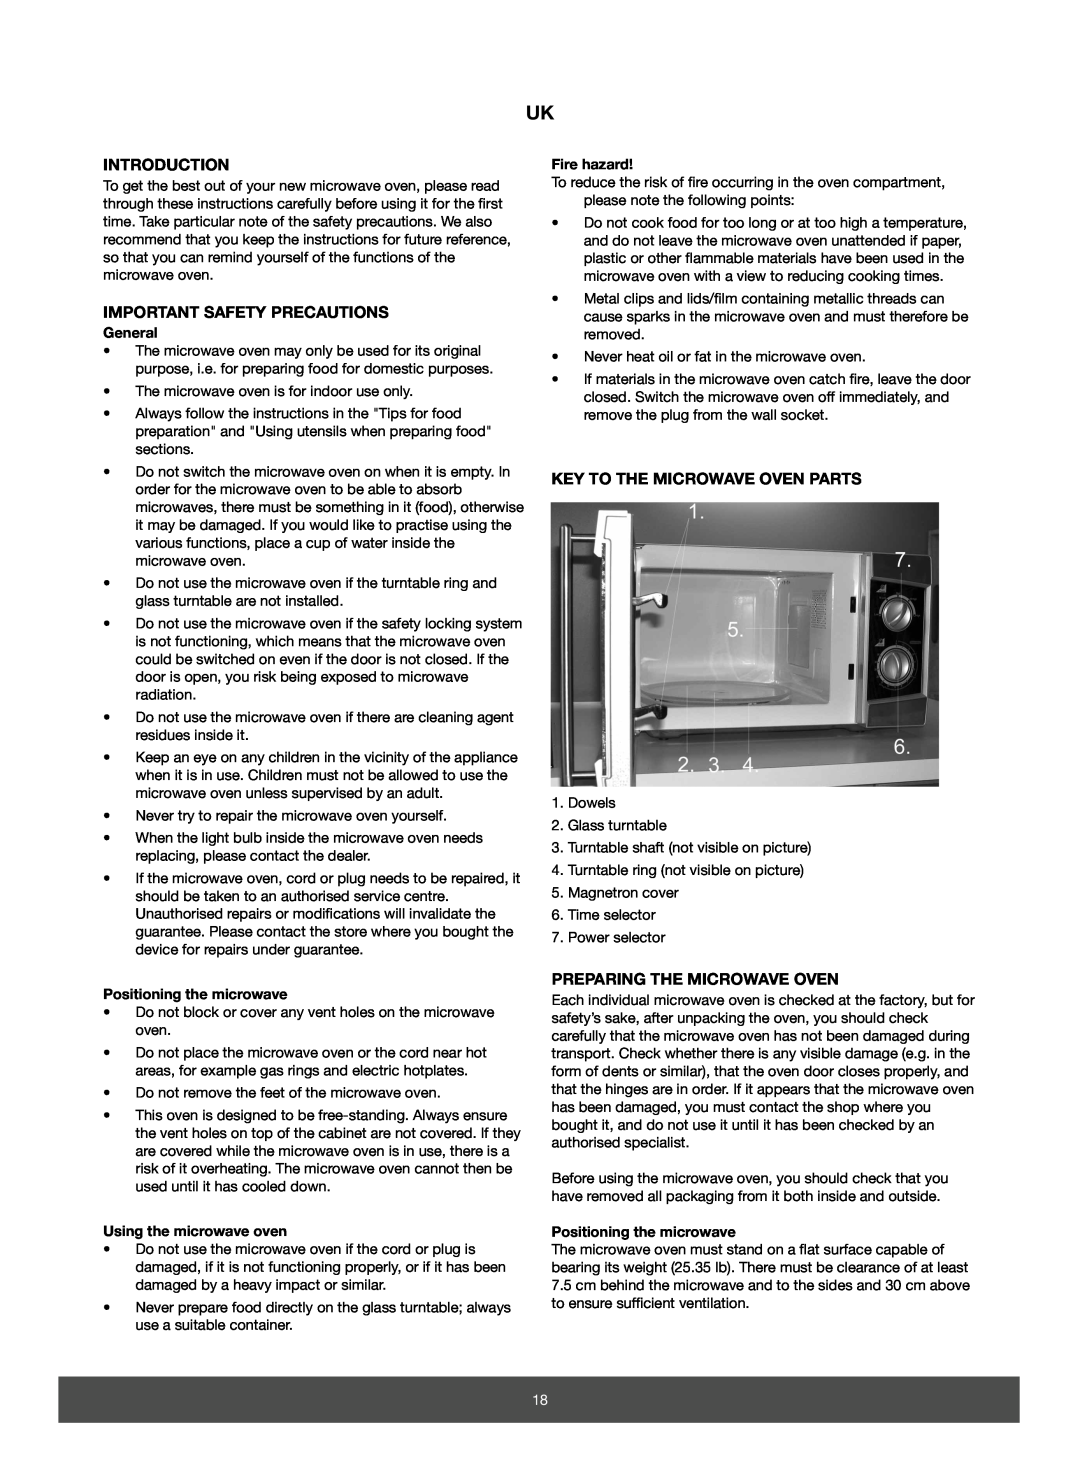 Melissa 653-070 Introduction, Important Safety Precautions, Key To The Microwave Oven Parts, Preparing The Microwave Oven 